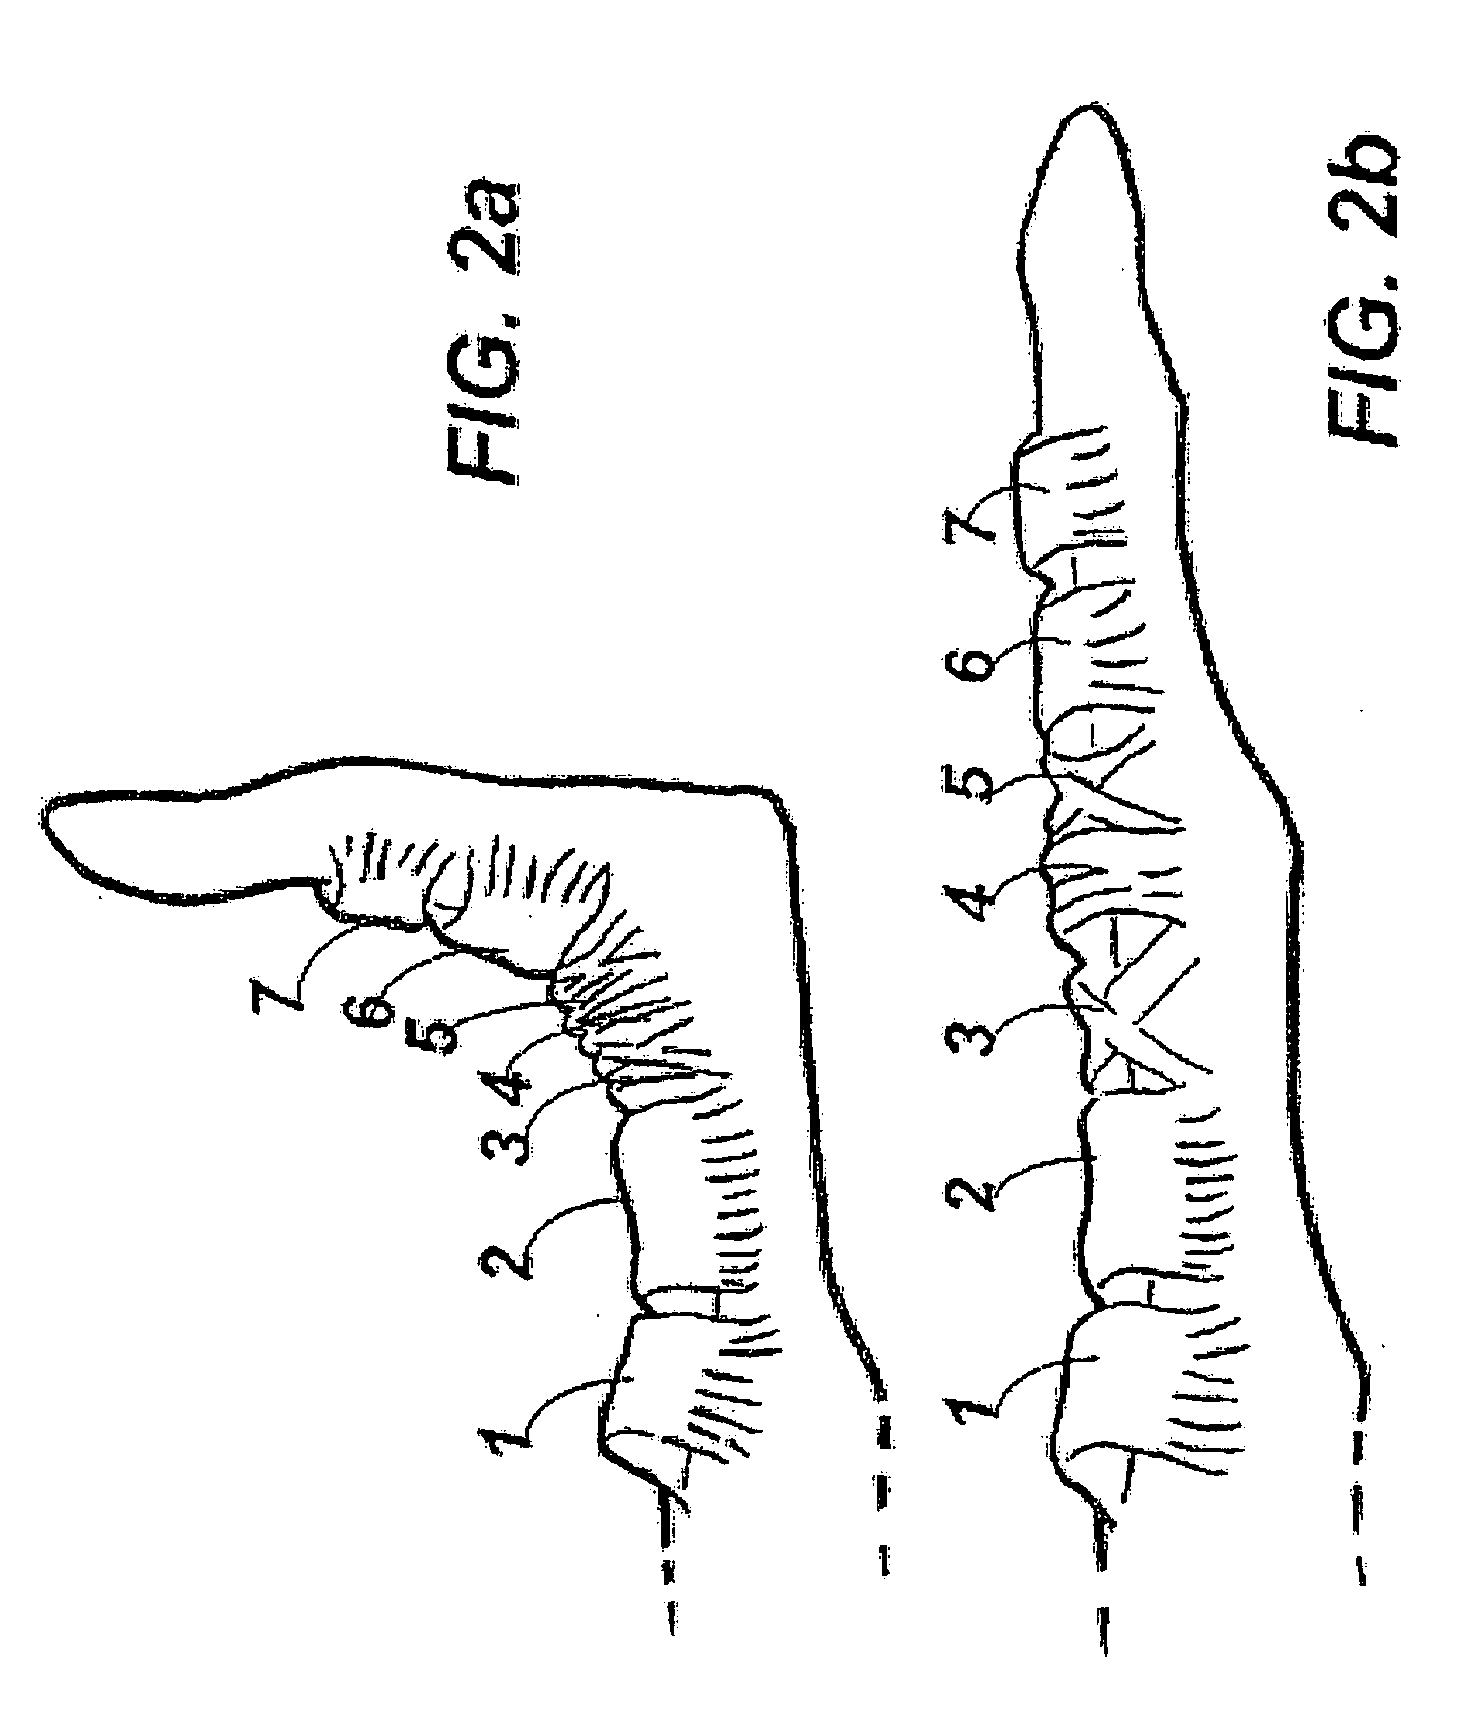 Device and method for assisting in flexor tendon repair and rehabilitation